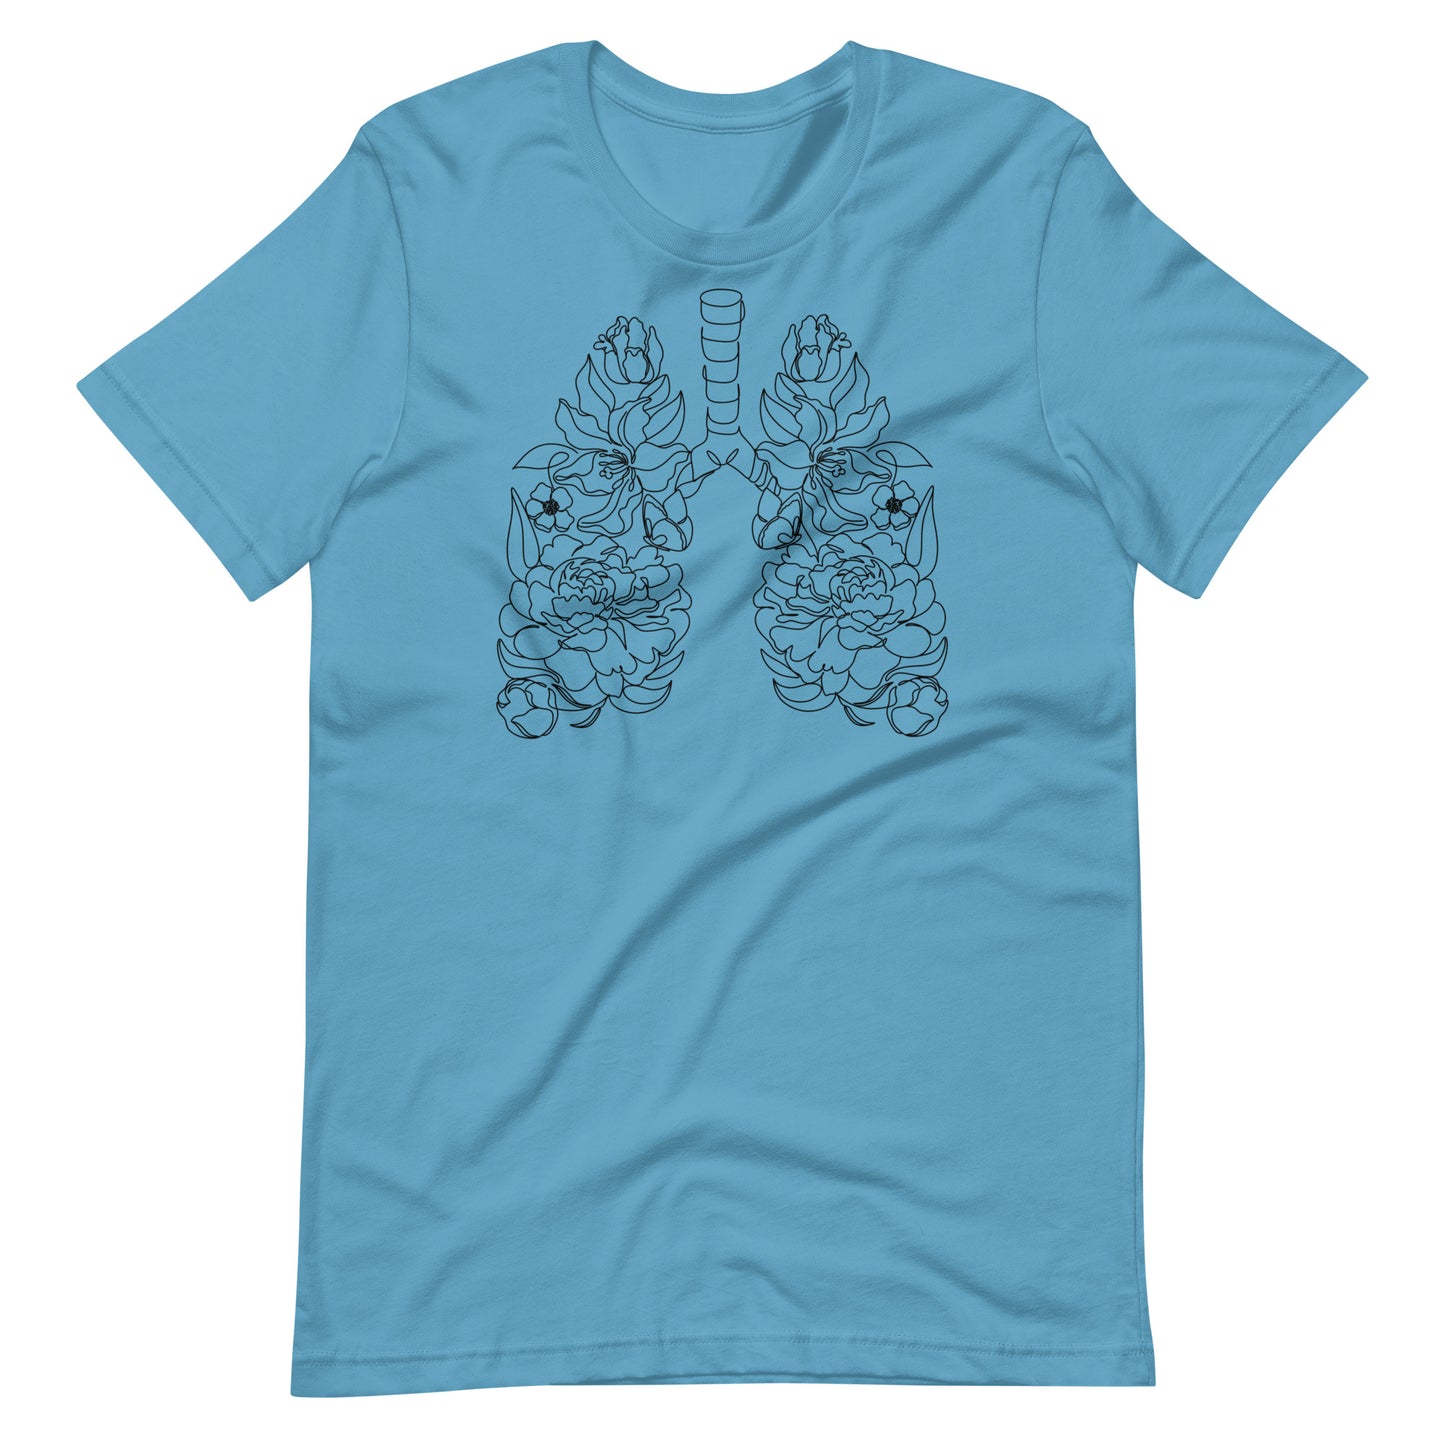 Graphic Tee, Clear Lungs, Lungs, Pulmonary, Breathing, Breathe, Funny Doctor Shirt, Medical Student, Funny Nurse Shirt, Funny Resident Shirt, Doctor, Physician, Resident, Nurse, PA, NP, Medical Student, Pulmonary Fibrosis, Lung Cancer, Asthma